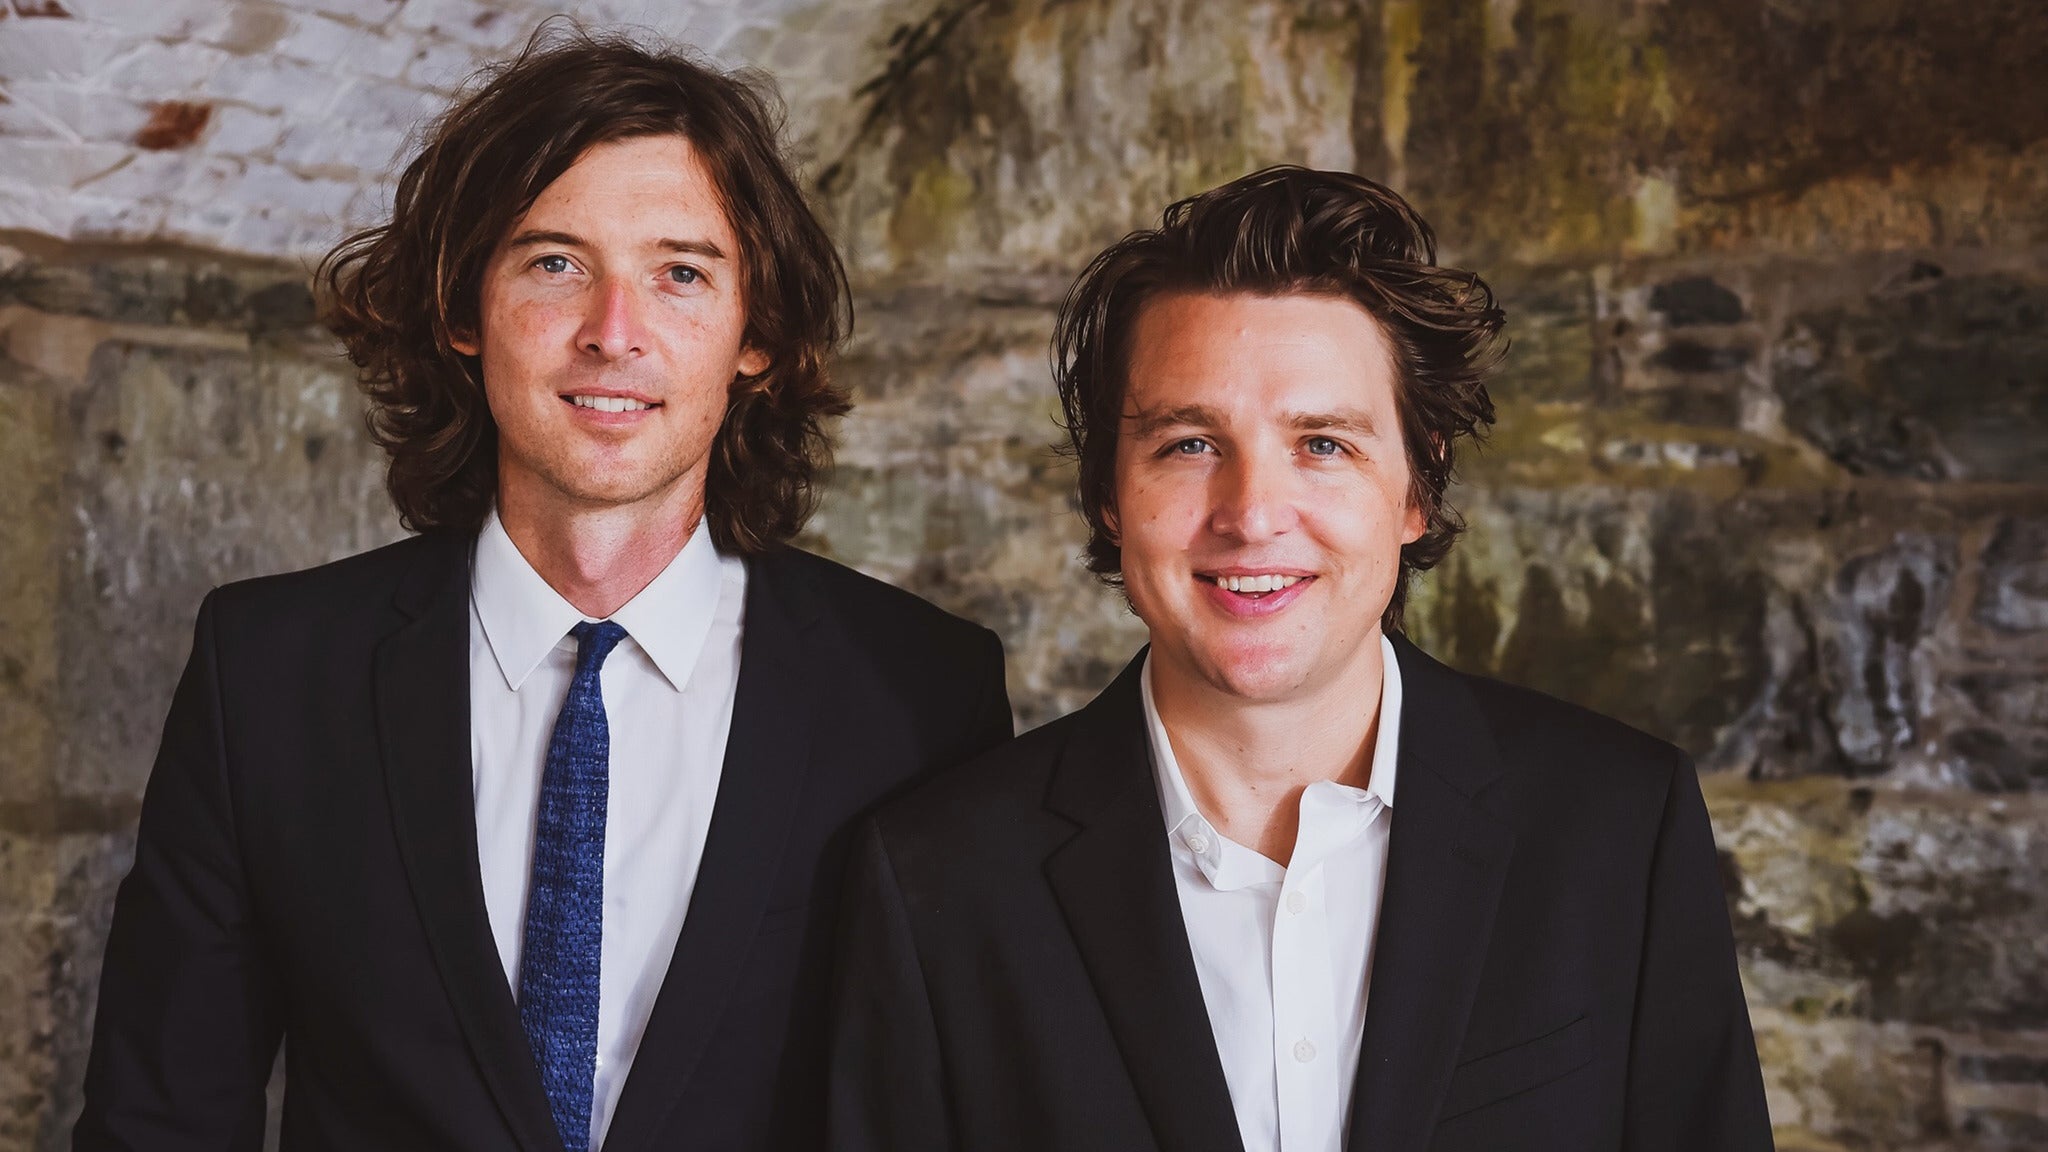 The Milk Carton Kids: With Special Guest The Barr Brothers in Boston promo photo for American Express presale offer code